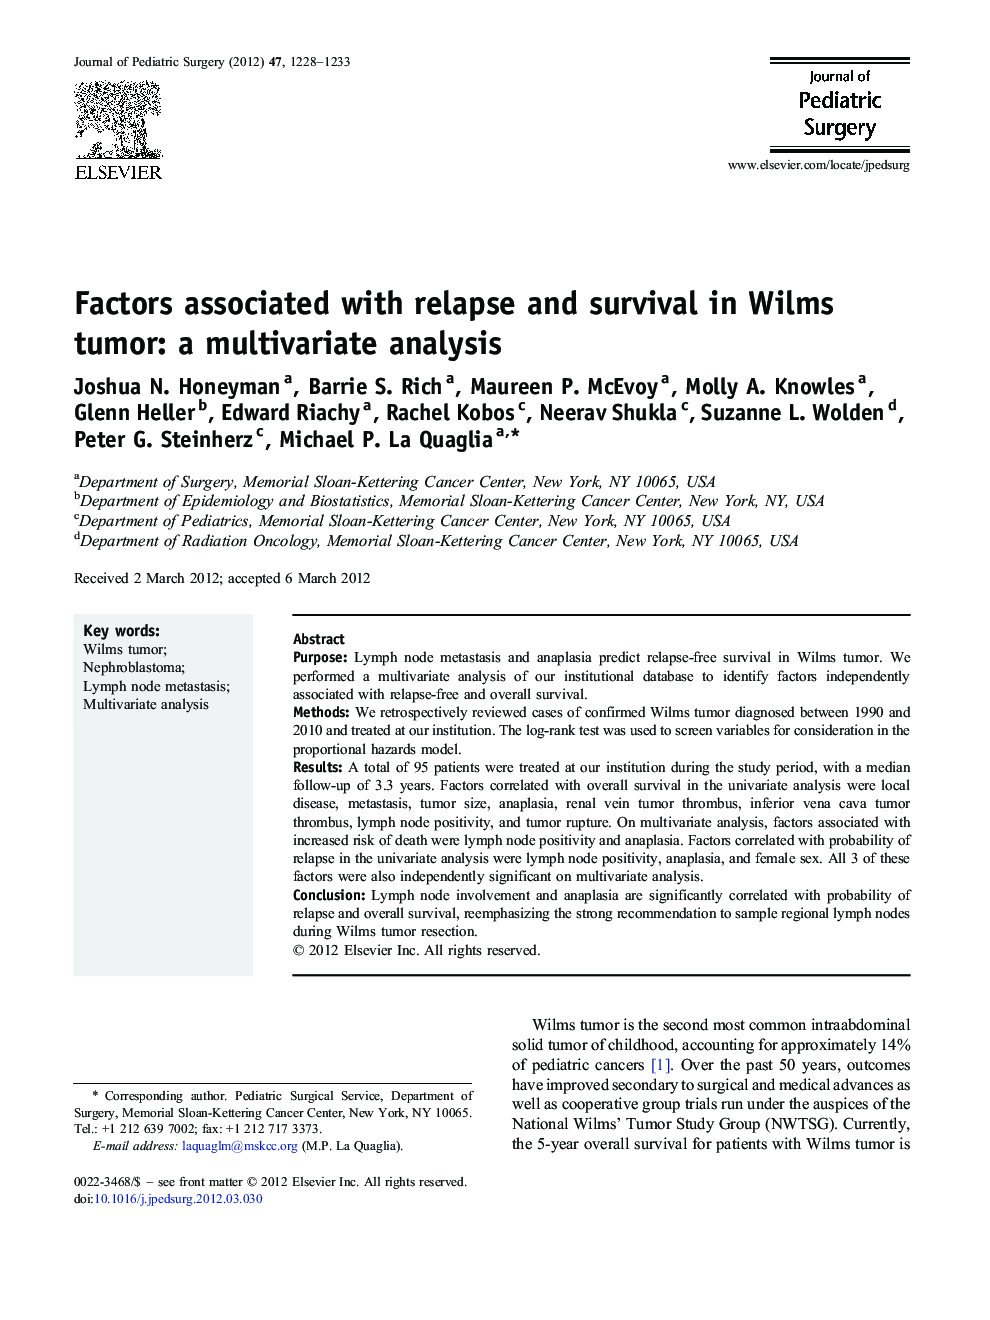 Factors associated with relapse and survival in Wilms tumor: a multivariate analysis